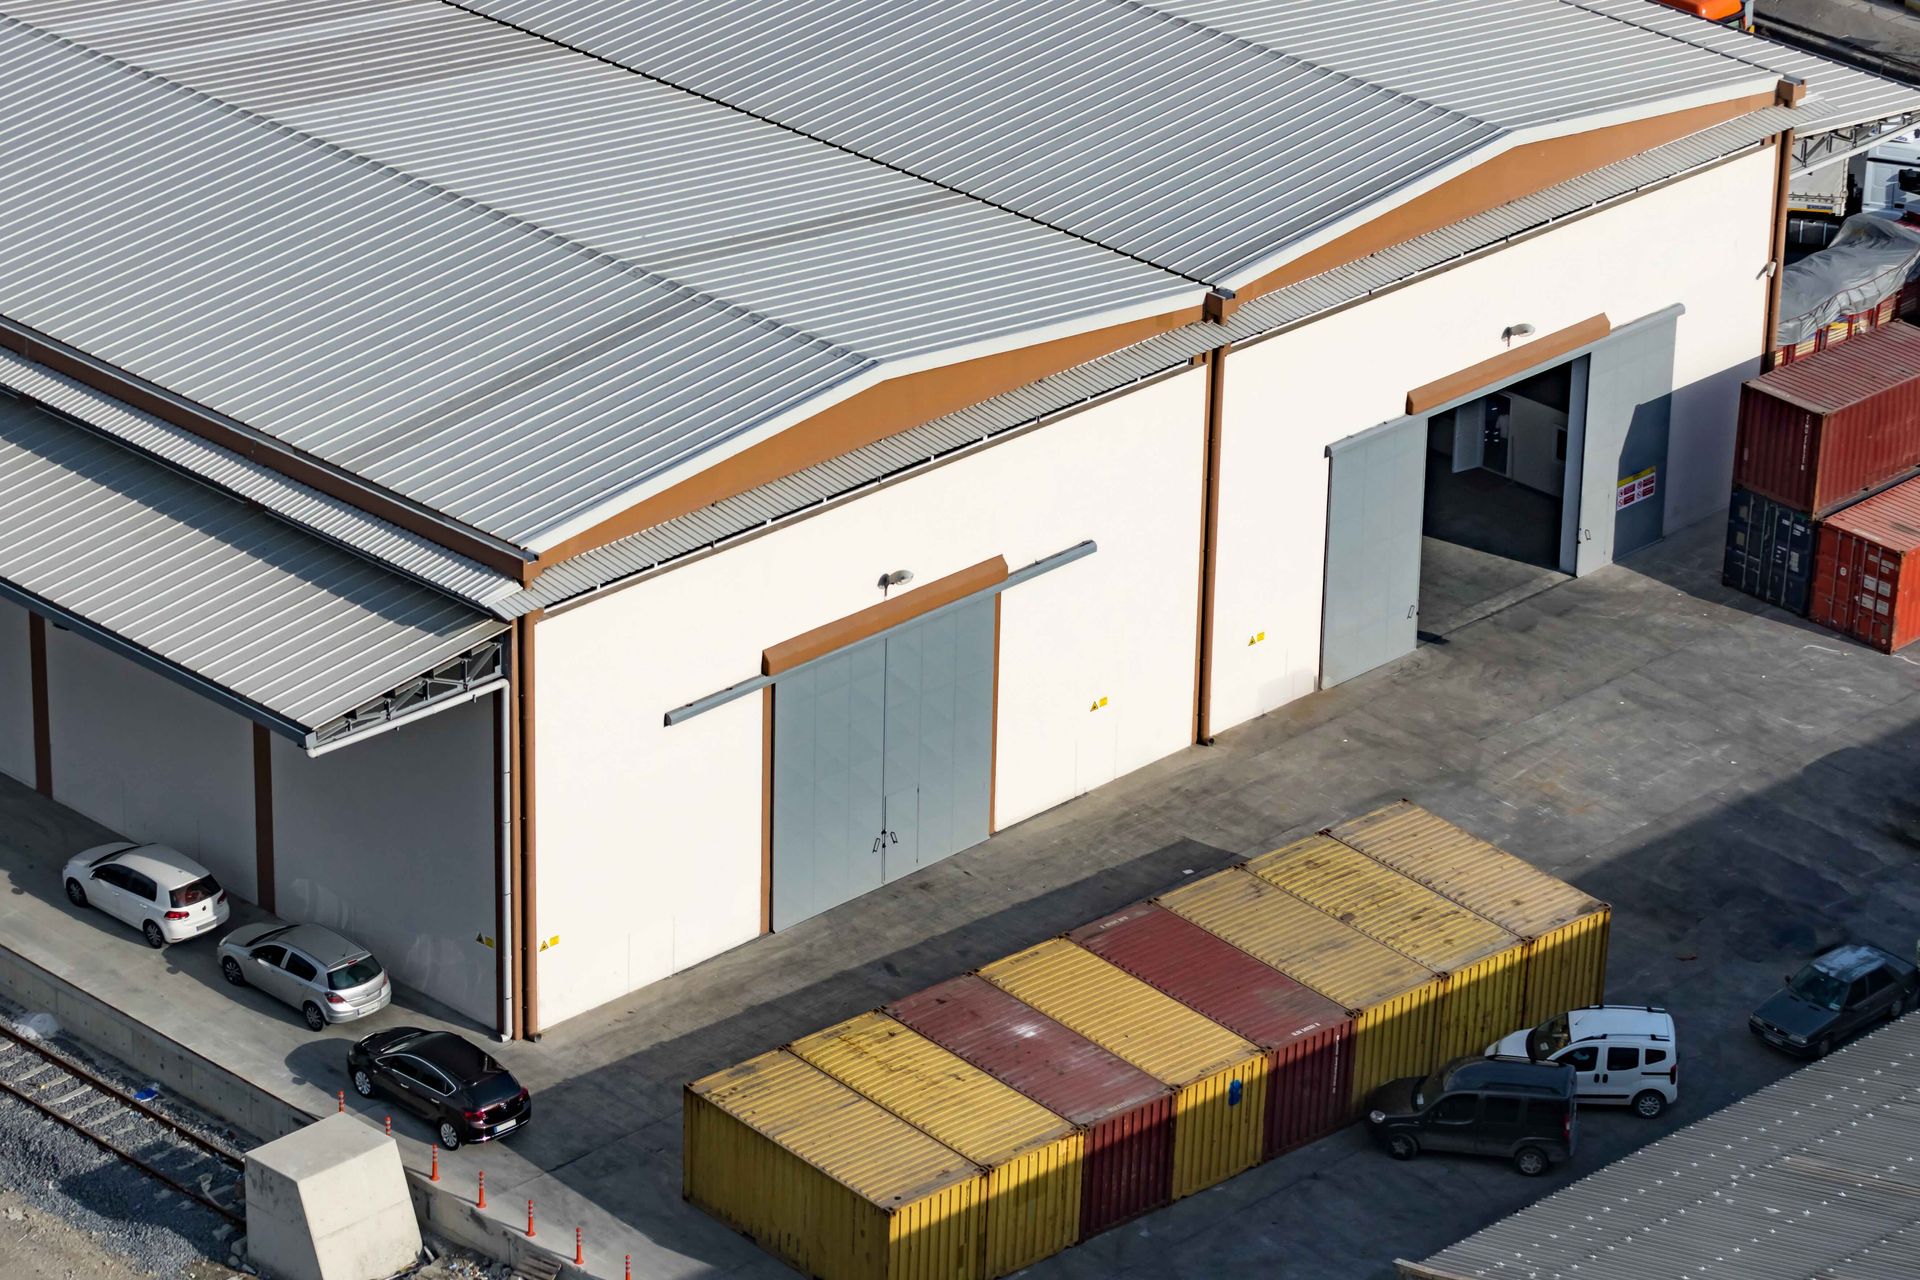 an aerial view of a warehouse filled with containers and cars parked in front of it .